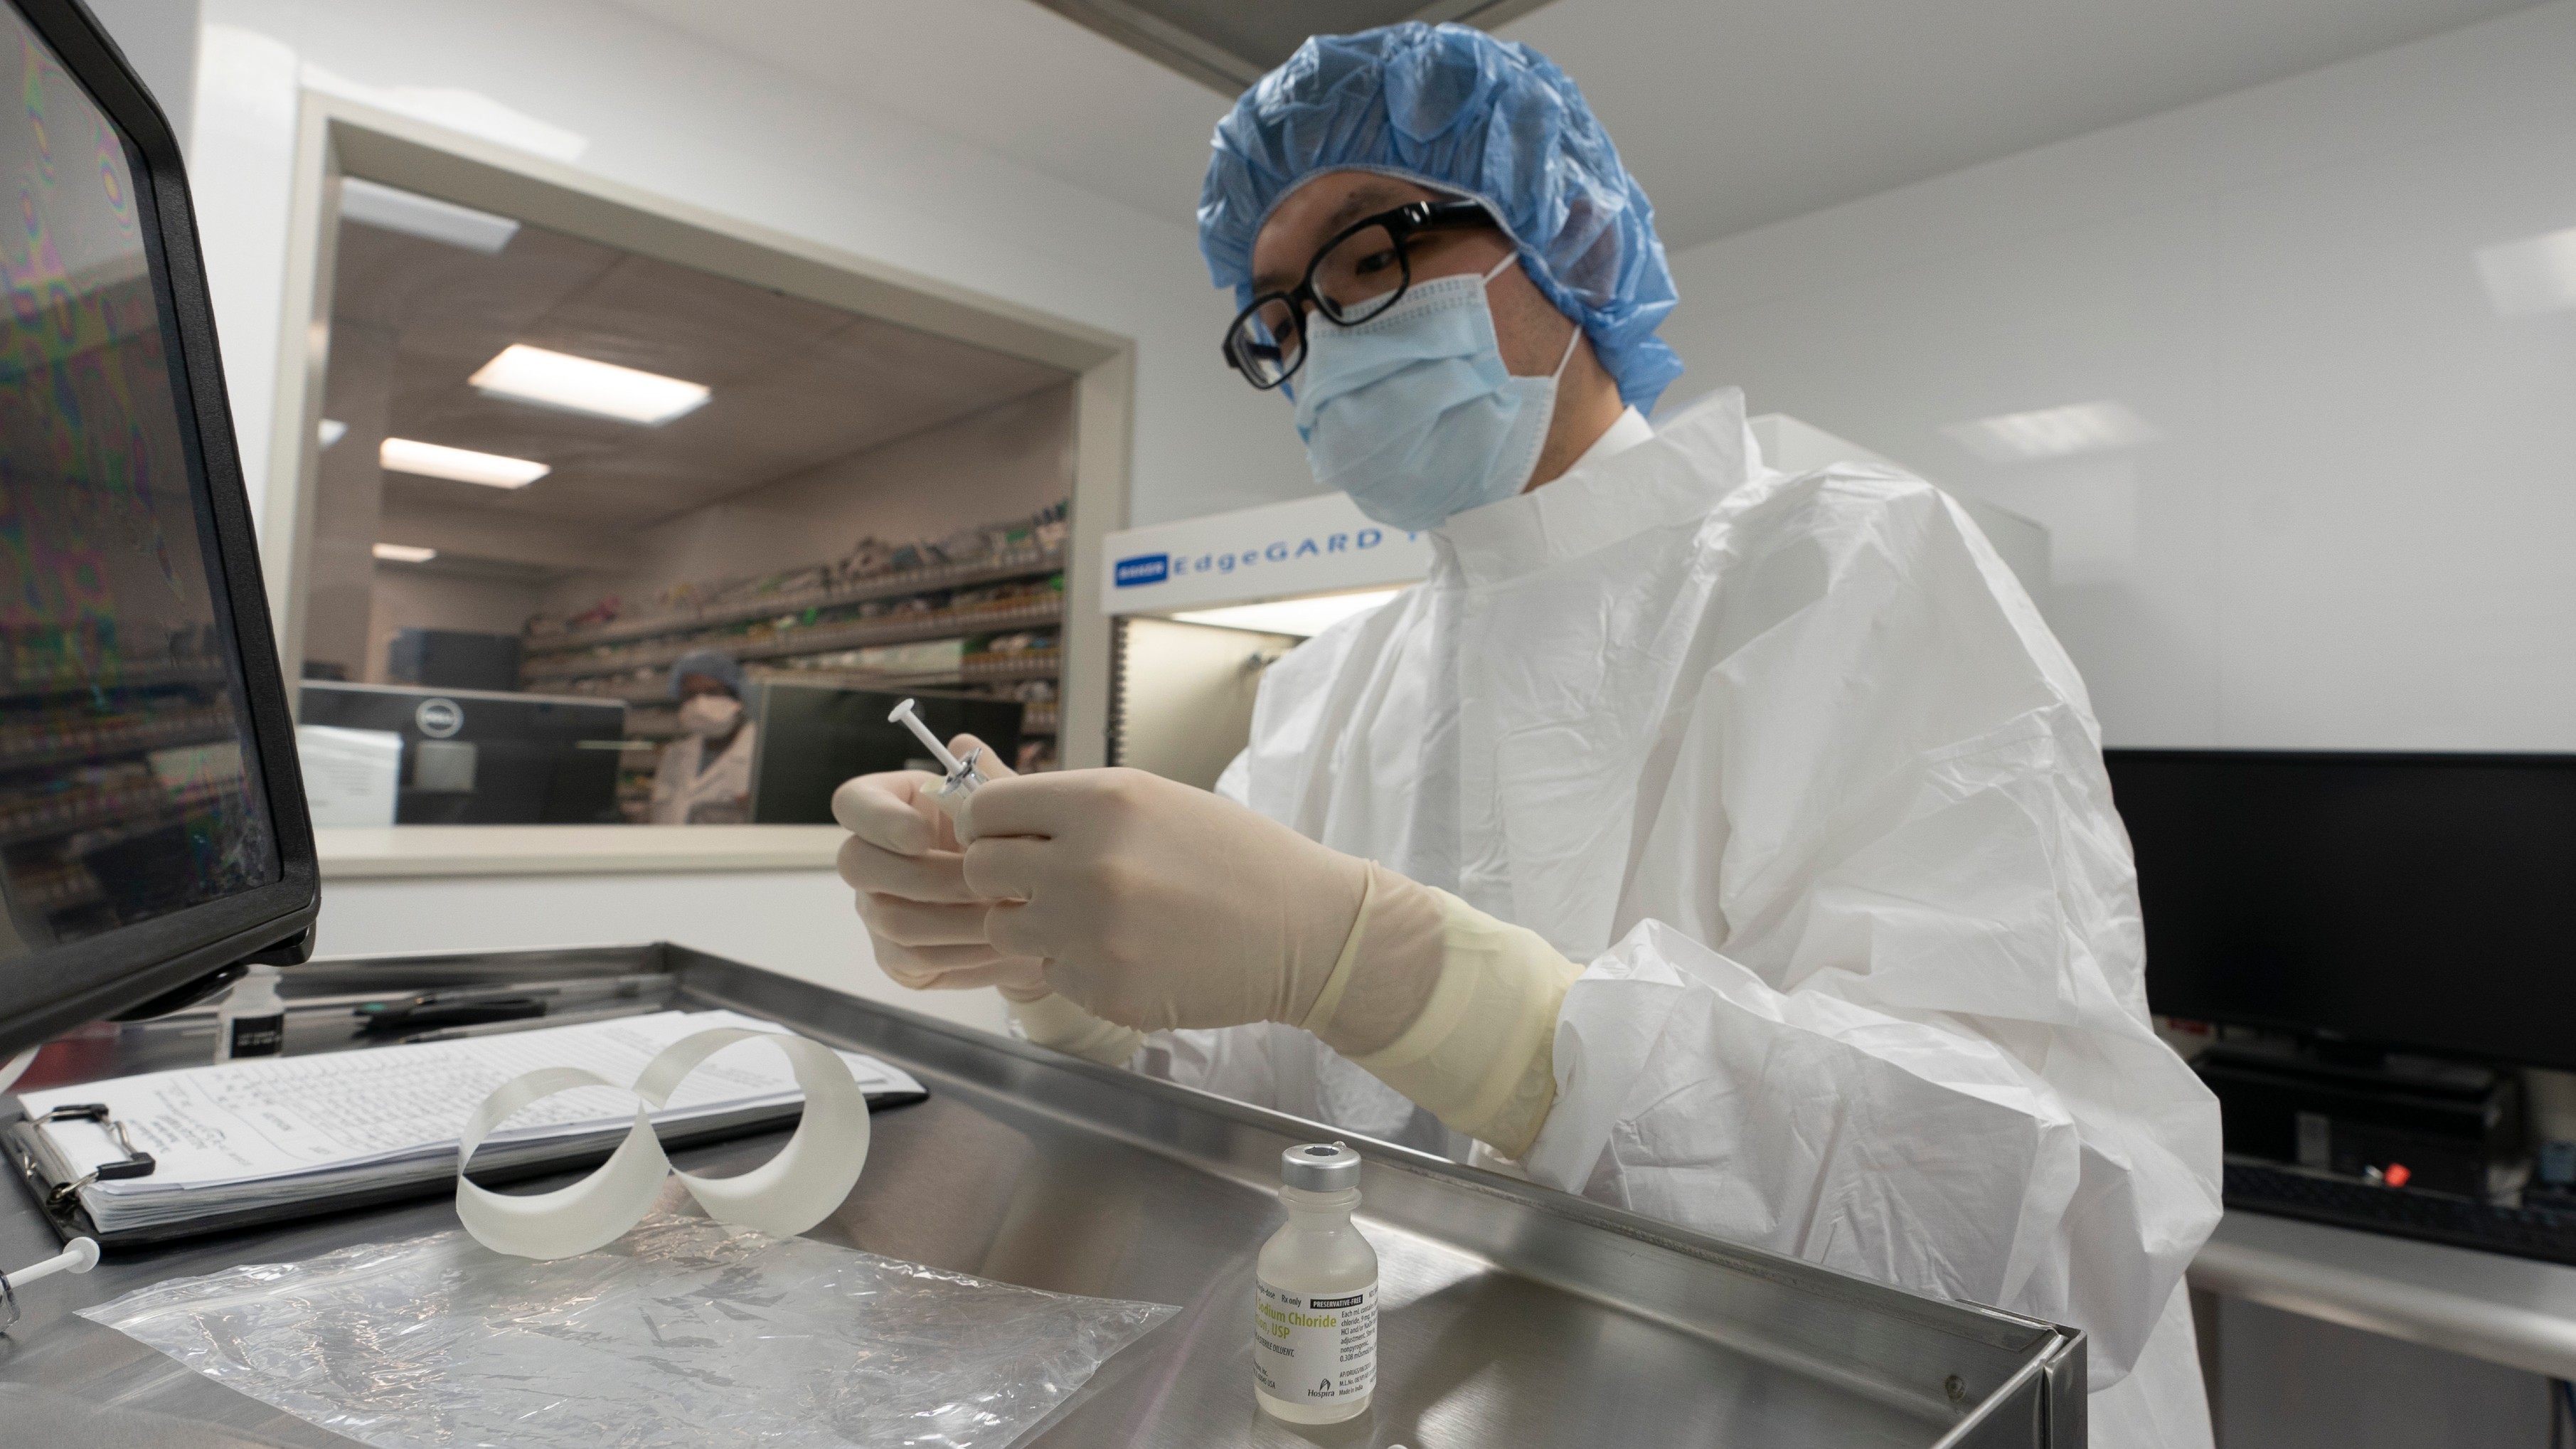 A pharmacist labels syringes in a clean room where doses of COVID-19 vaccines will be handled on Wednesday at Mount Sinai Queens hospital in New York. (AP Photo/Mark Lennihan)